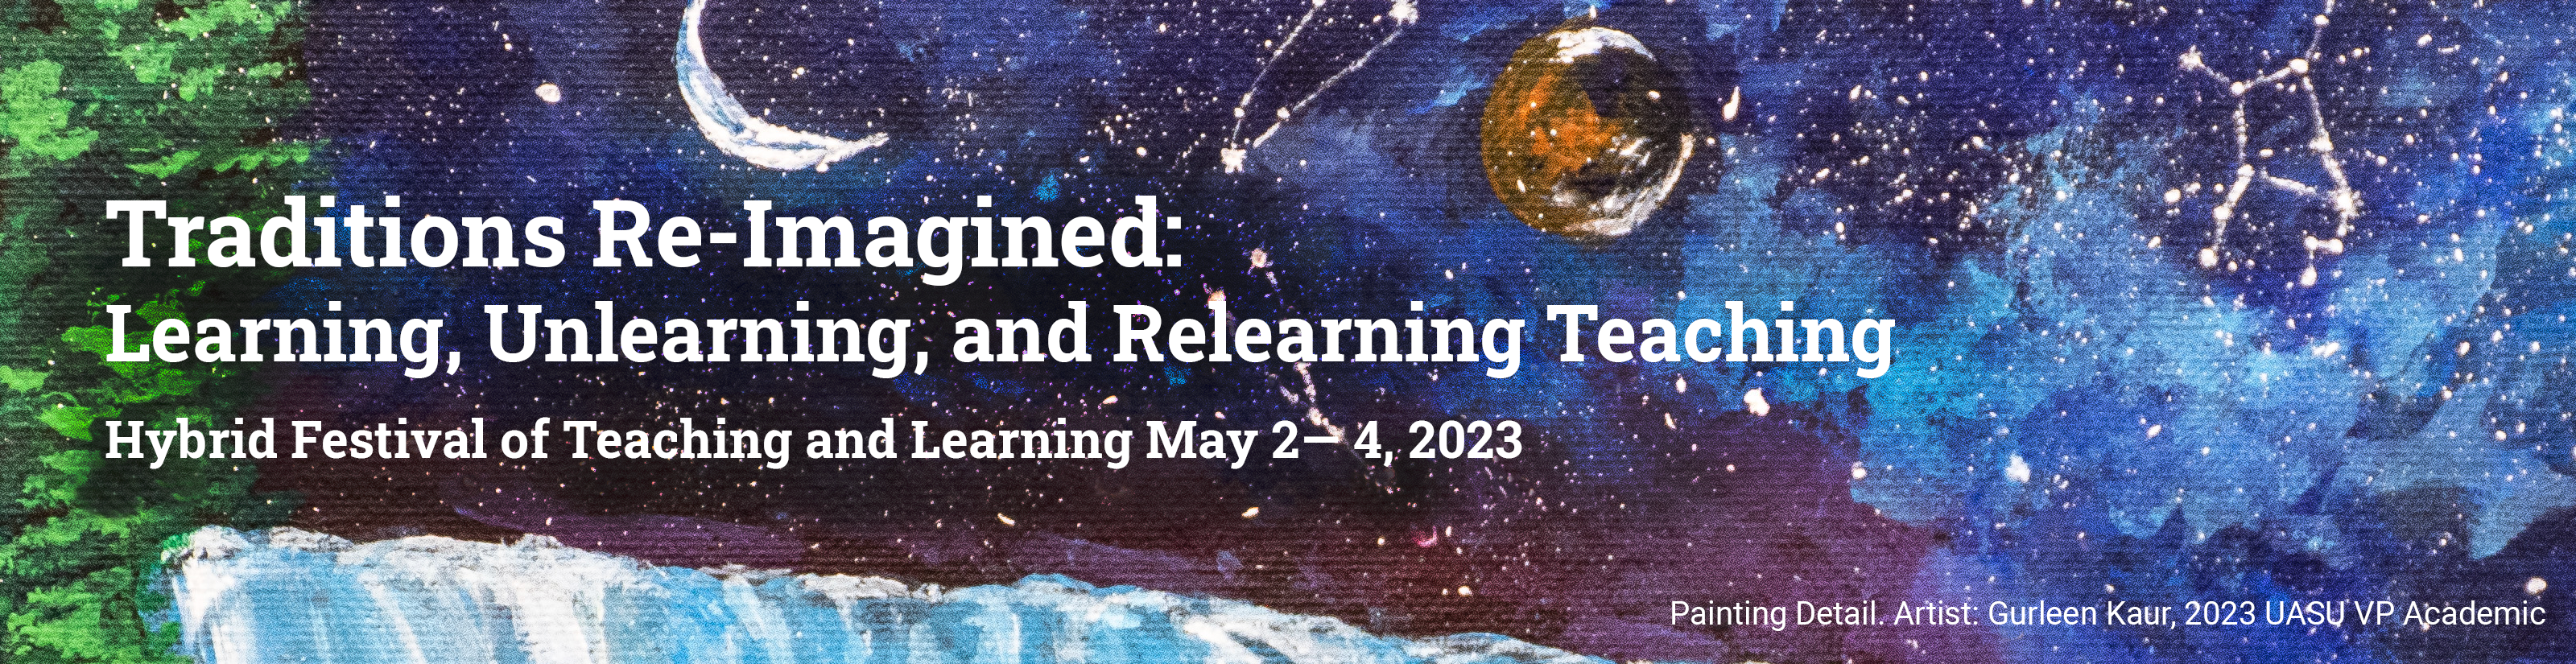 Traditions Re-Imagined: Learning, Unlearning, and Relearning Teaching  Hybrid Festival of Teaching and Learning May 2— 4, 2023